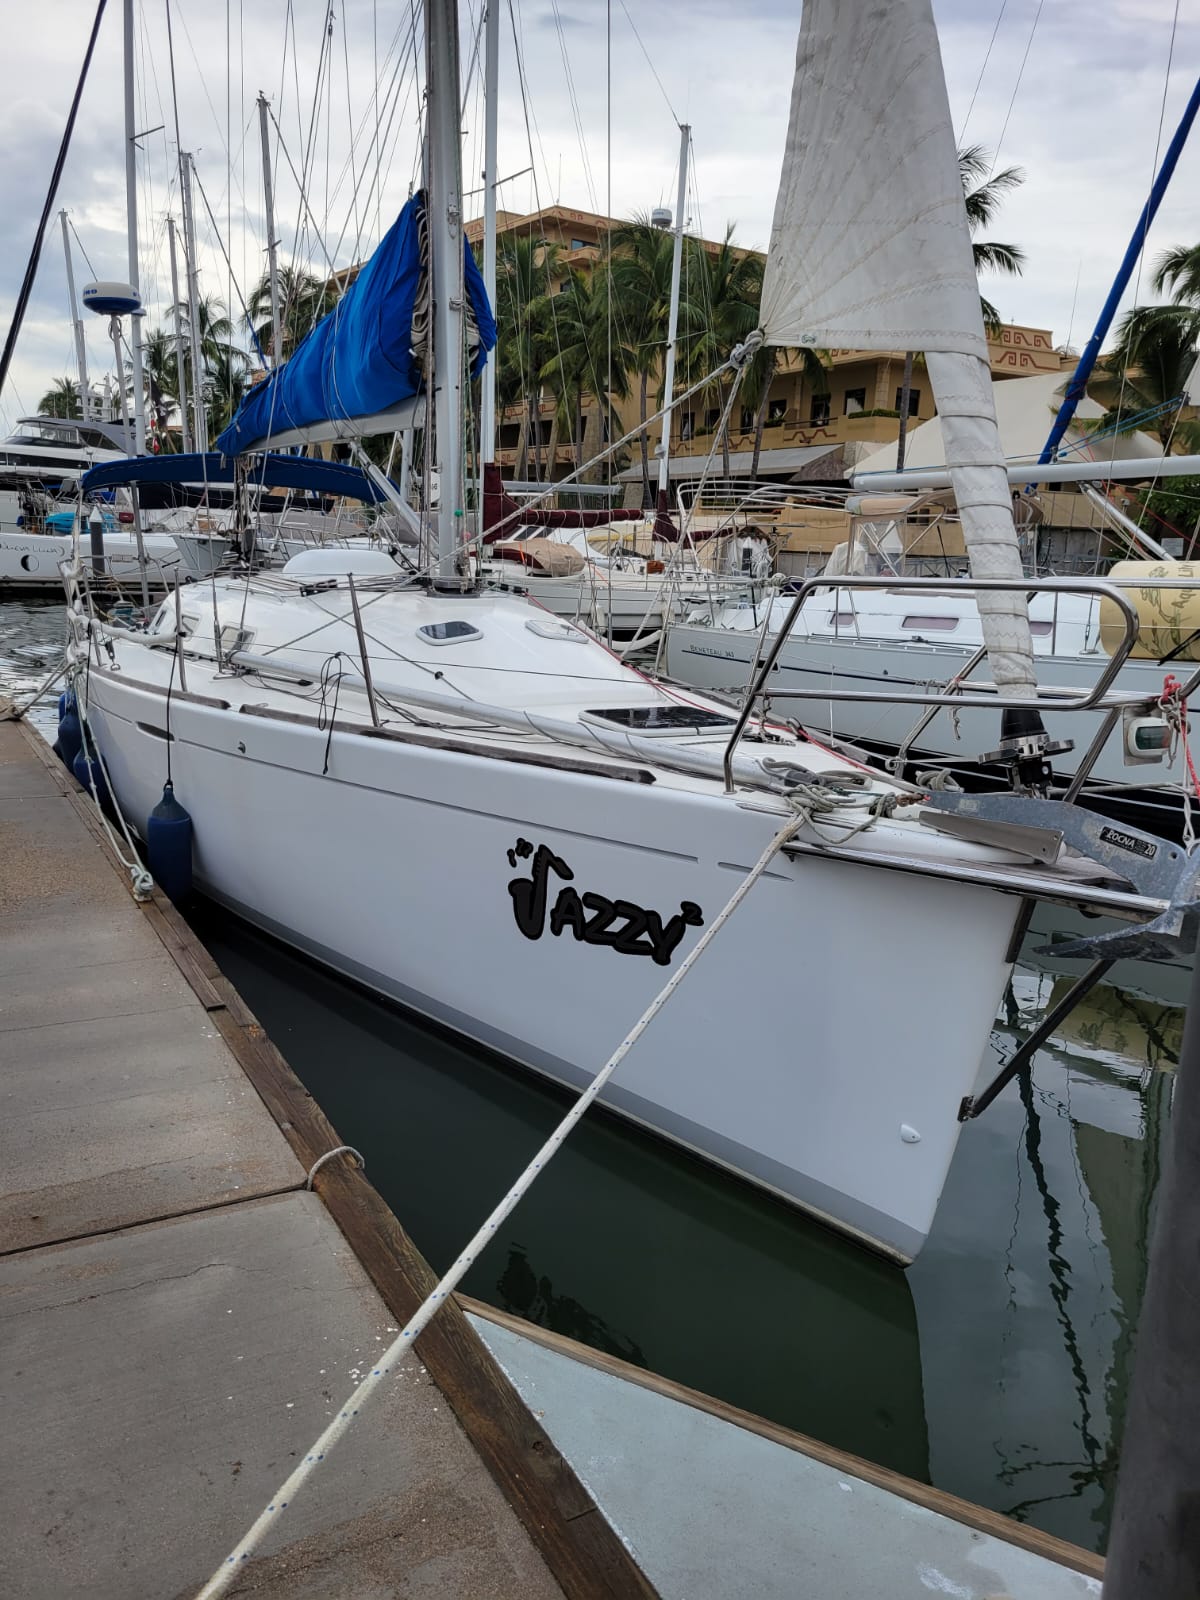 2002 Other First 36.7 Sailboat for sale in Mexico - image 2 